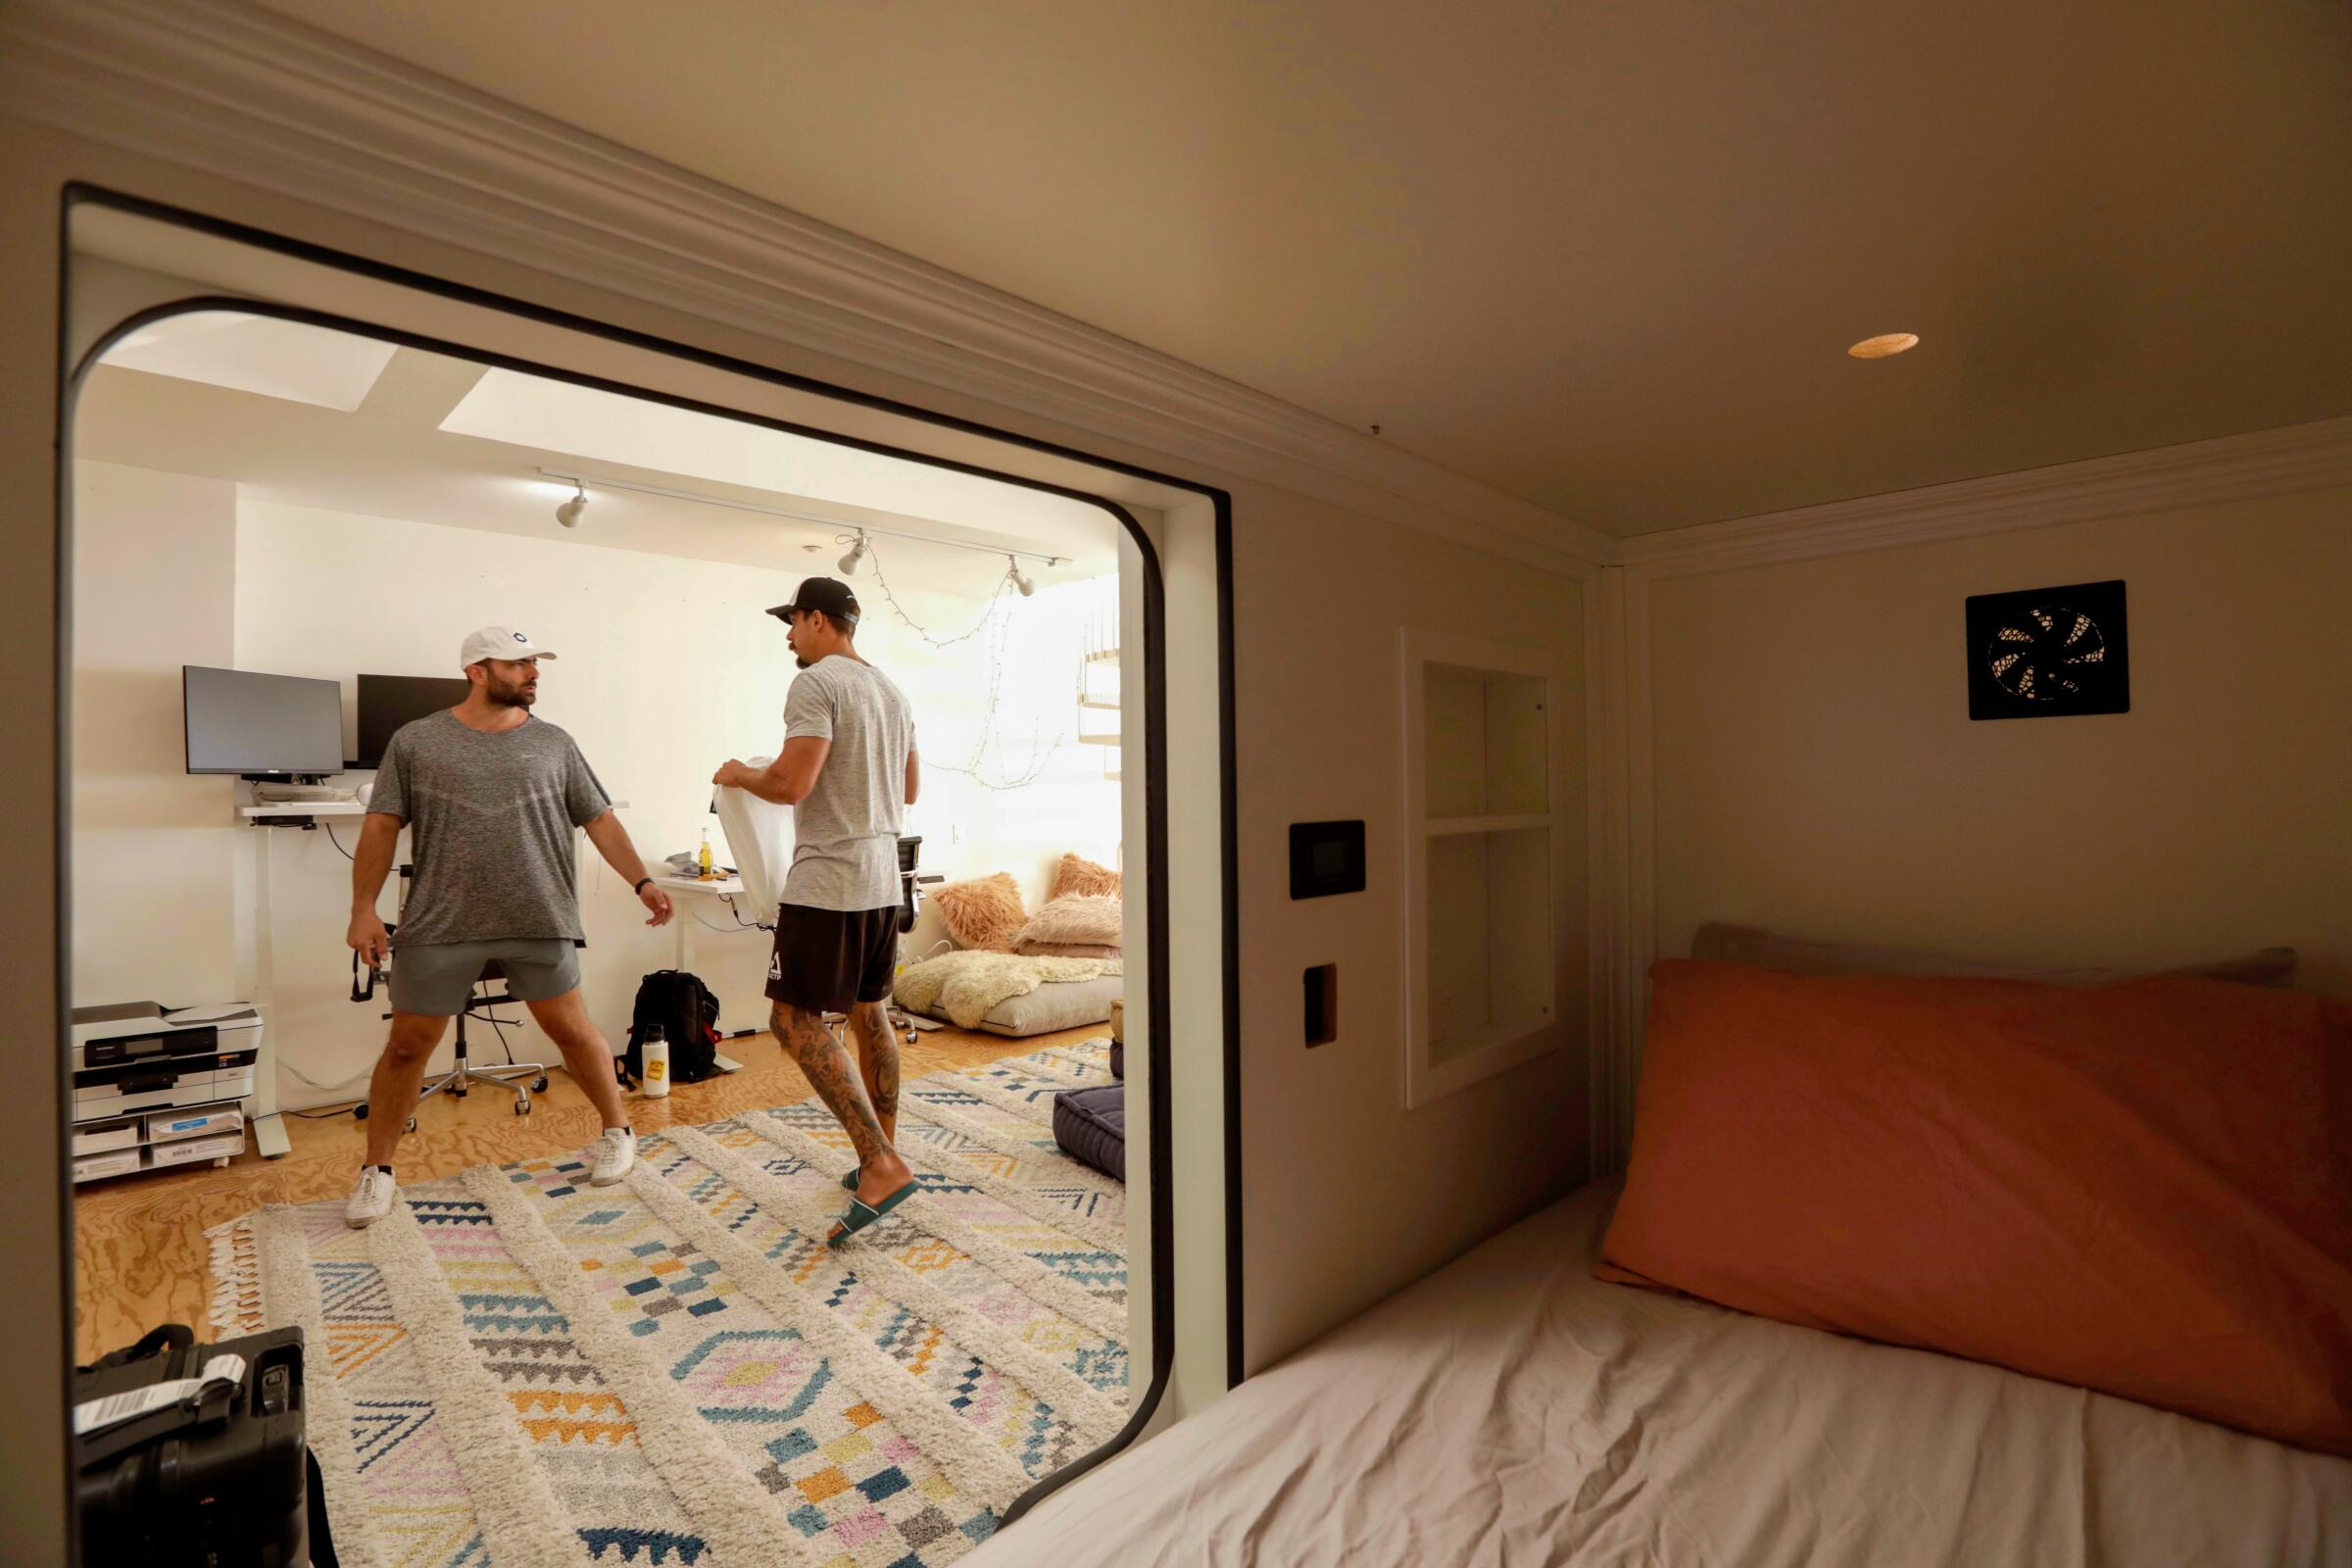 Two people, seen through the opening to a sleeping pod at a hotel.